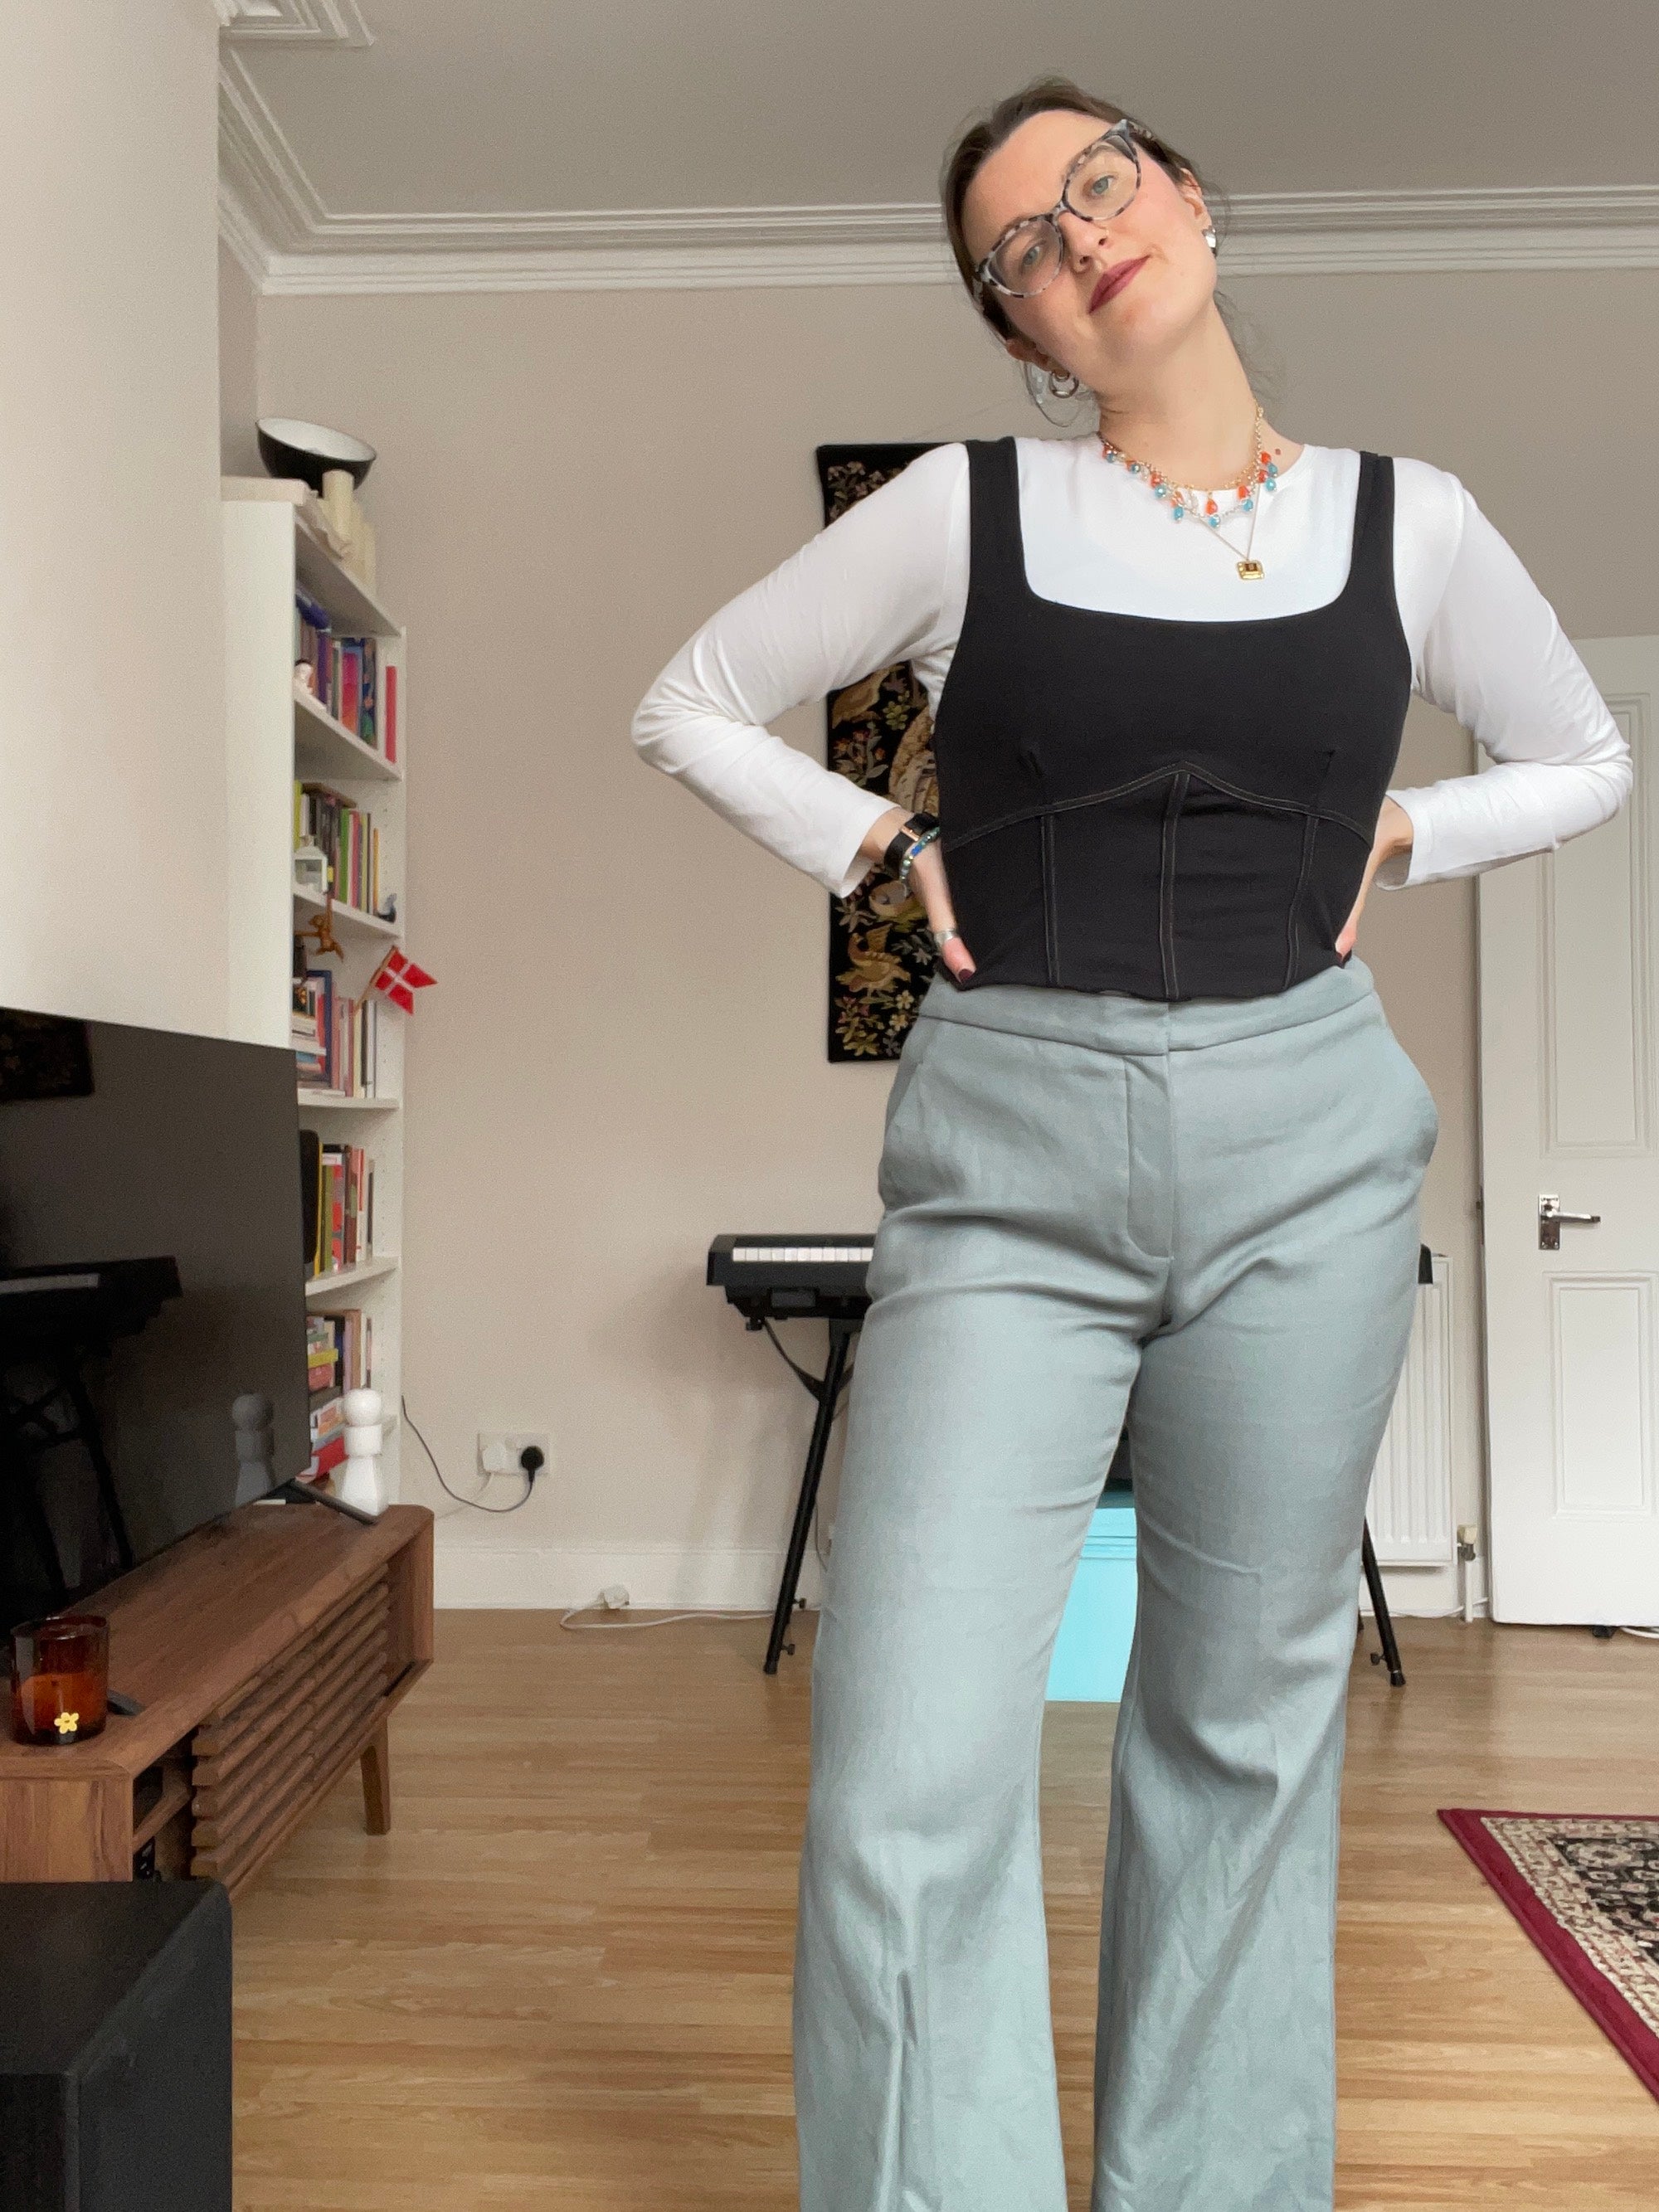 This Corset Style Is Taking Over Tops and Pants 